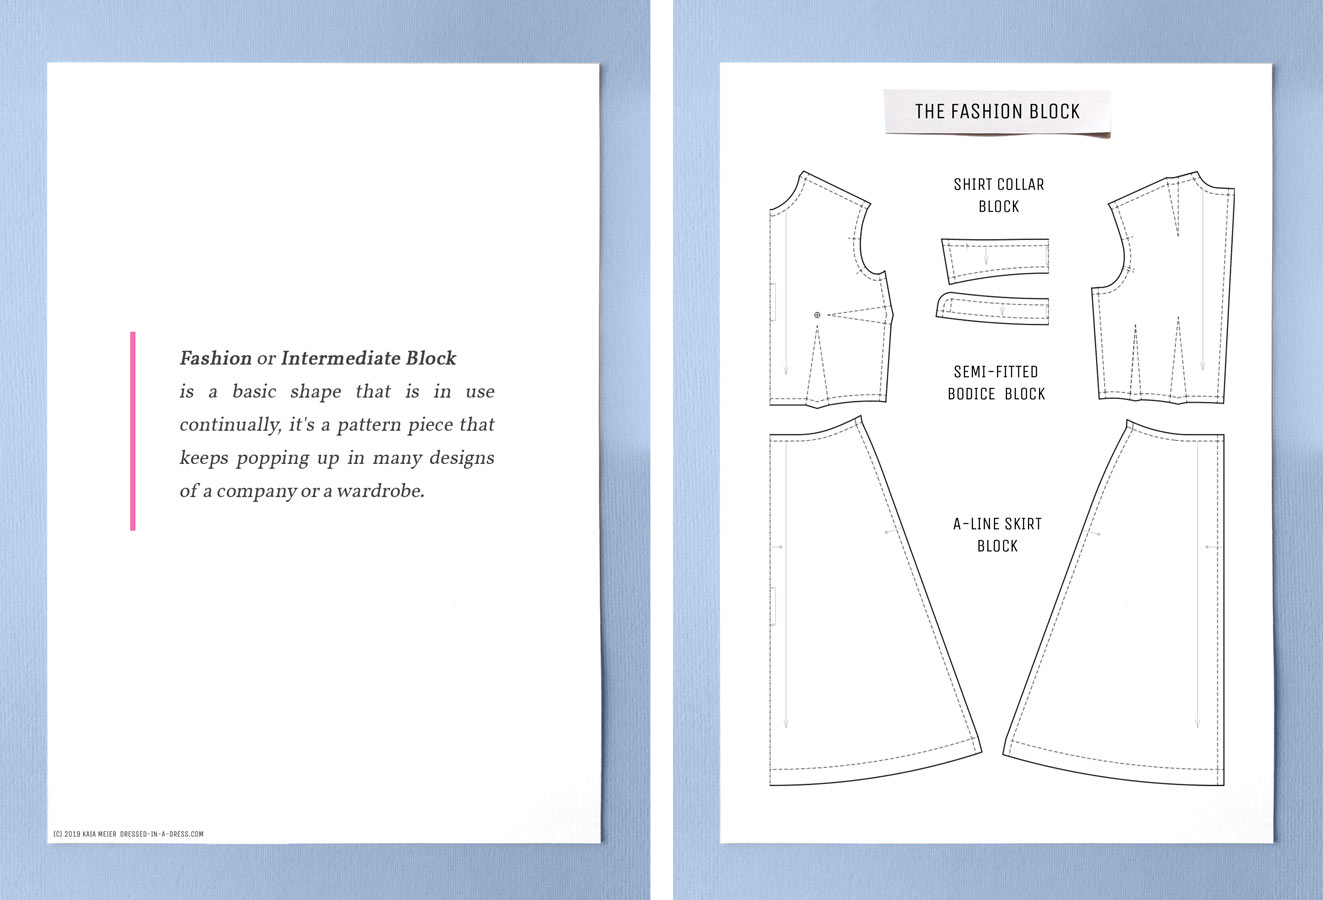 The Fashion Block and its defenition